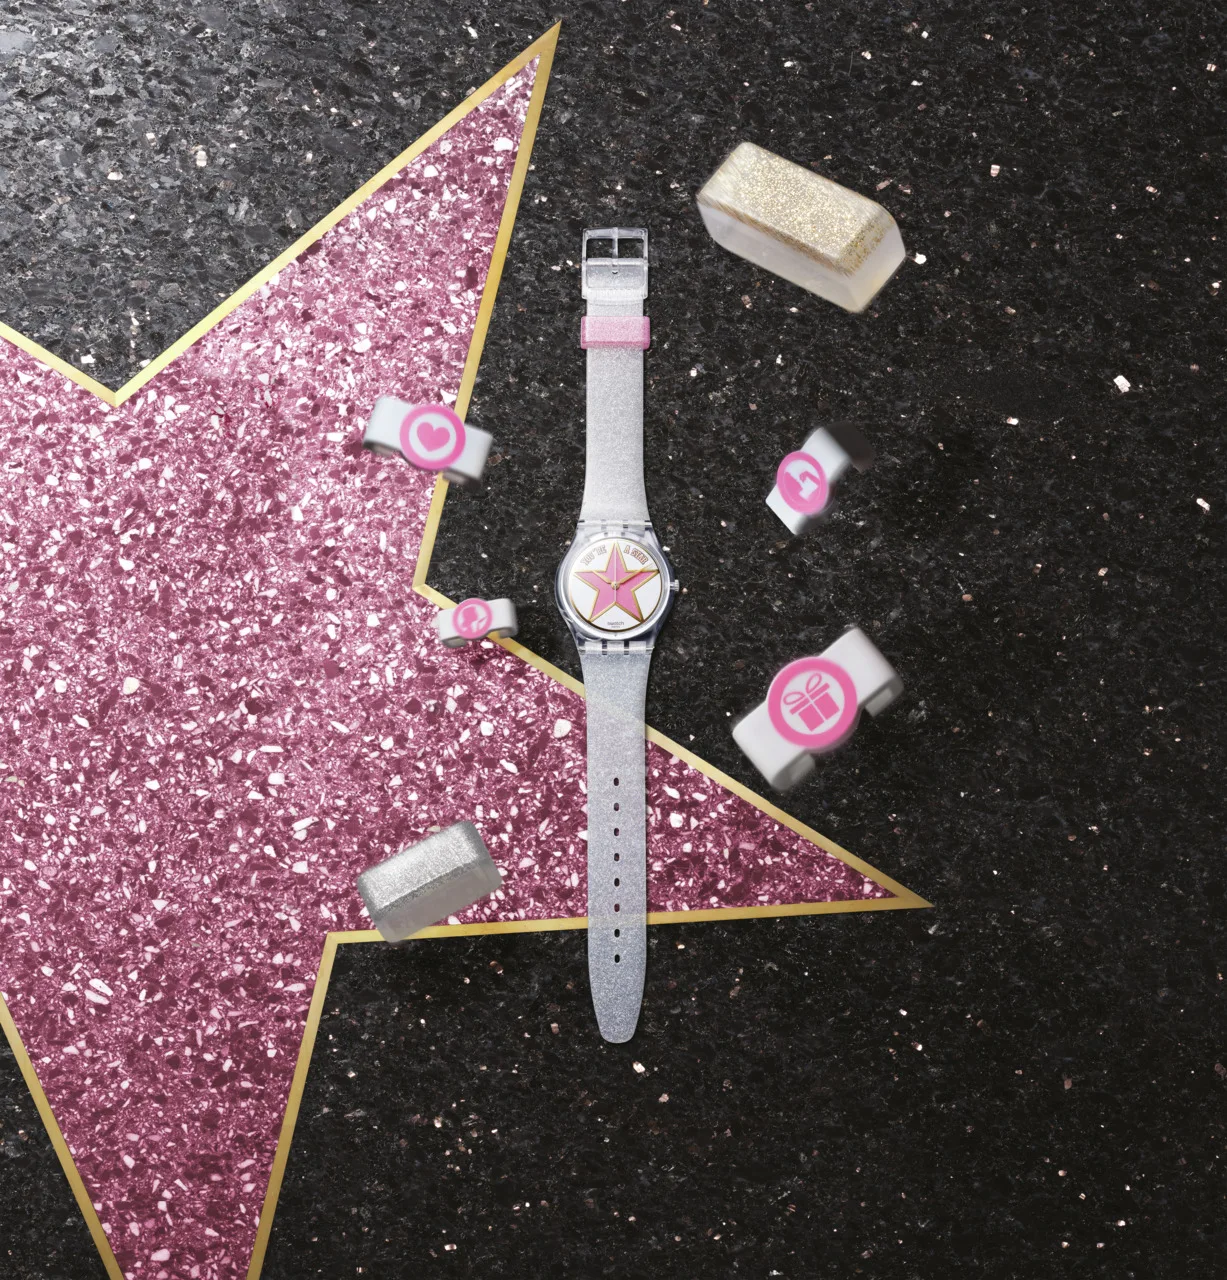 Forget flowers, reach for the Swatch star this Mother's Day